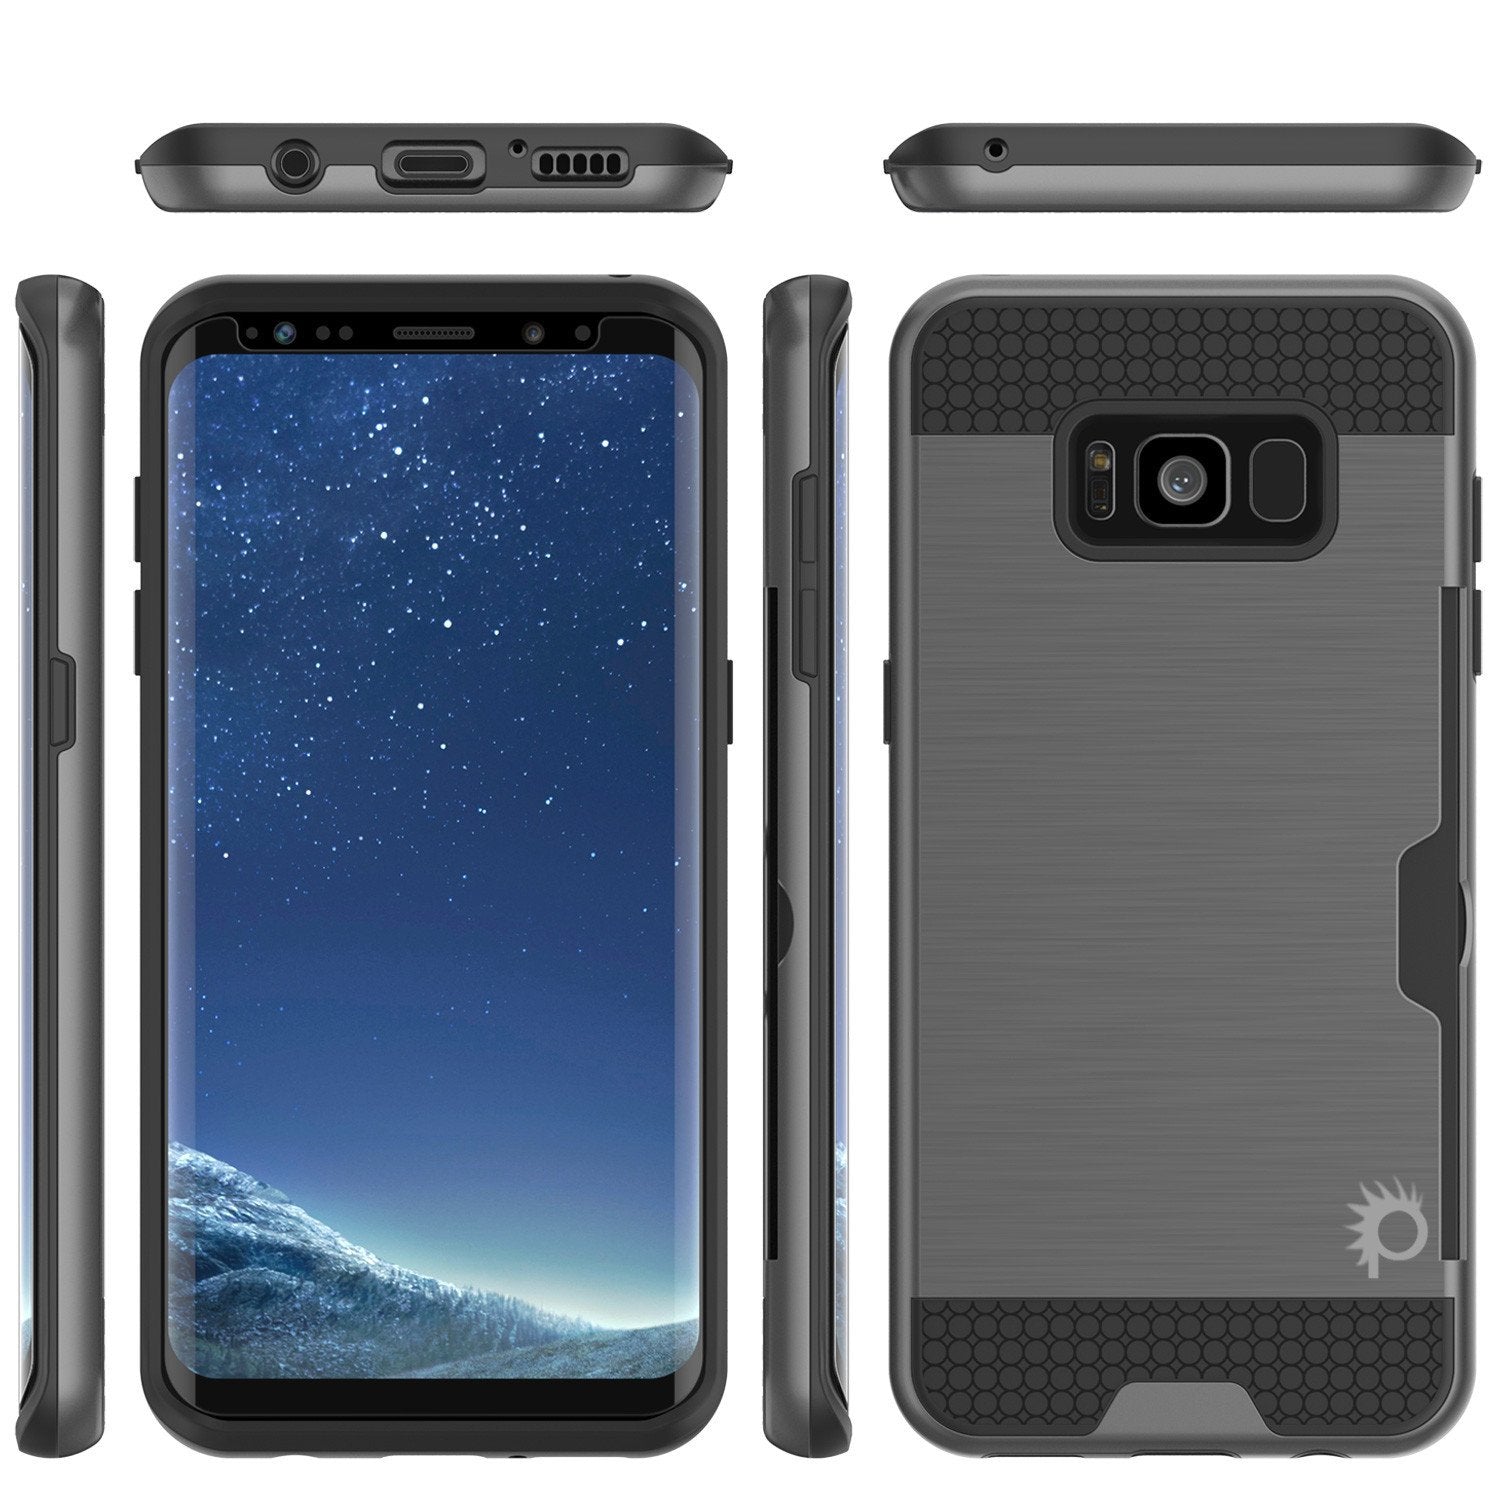 Galaxy S8 Plus Case, PUNKcase [SLOT Series] [Slim Fit] Dual-Layer Armor Cover w/Integrated Anti-Shock System, Credit Card Slot & PunkShield Screen Protector for Samsung Galaxy S8+ [Grey] - PunkCase NZ